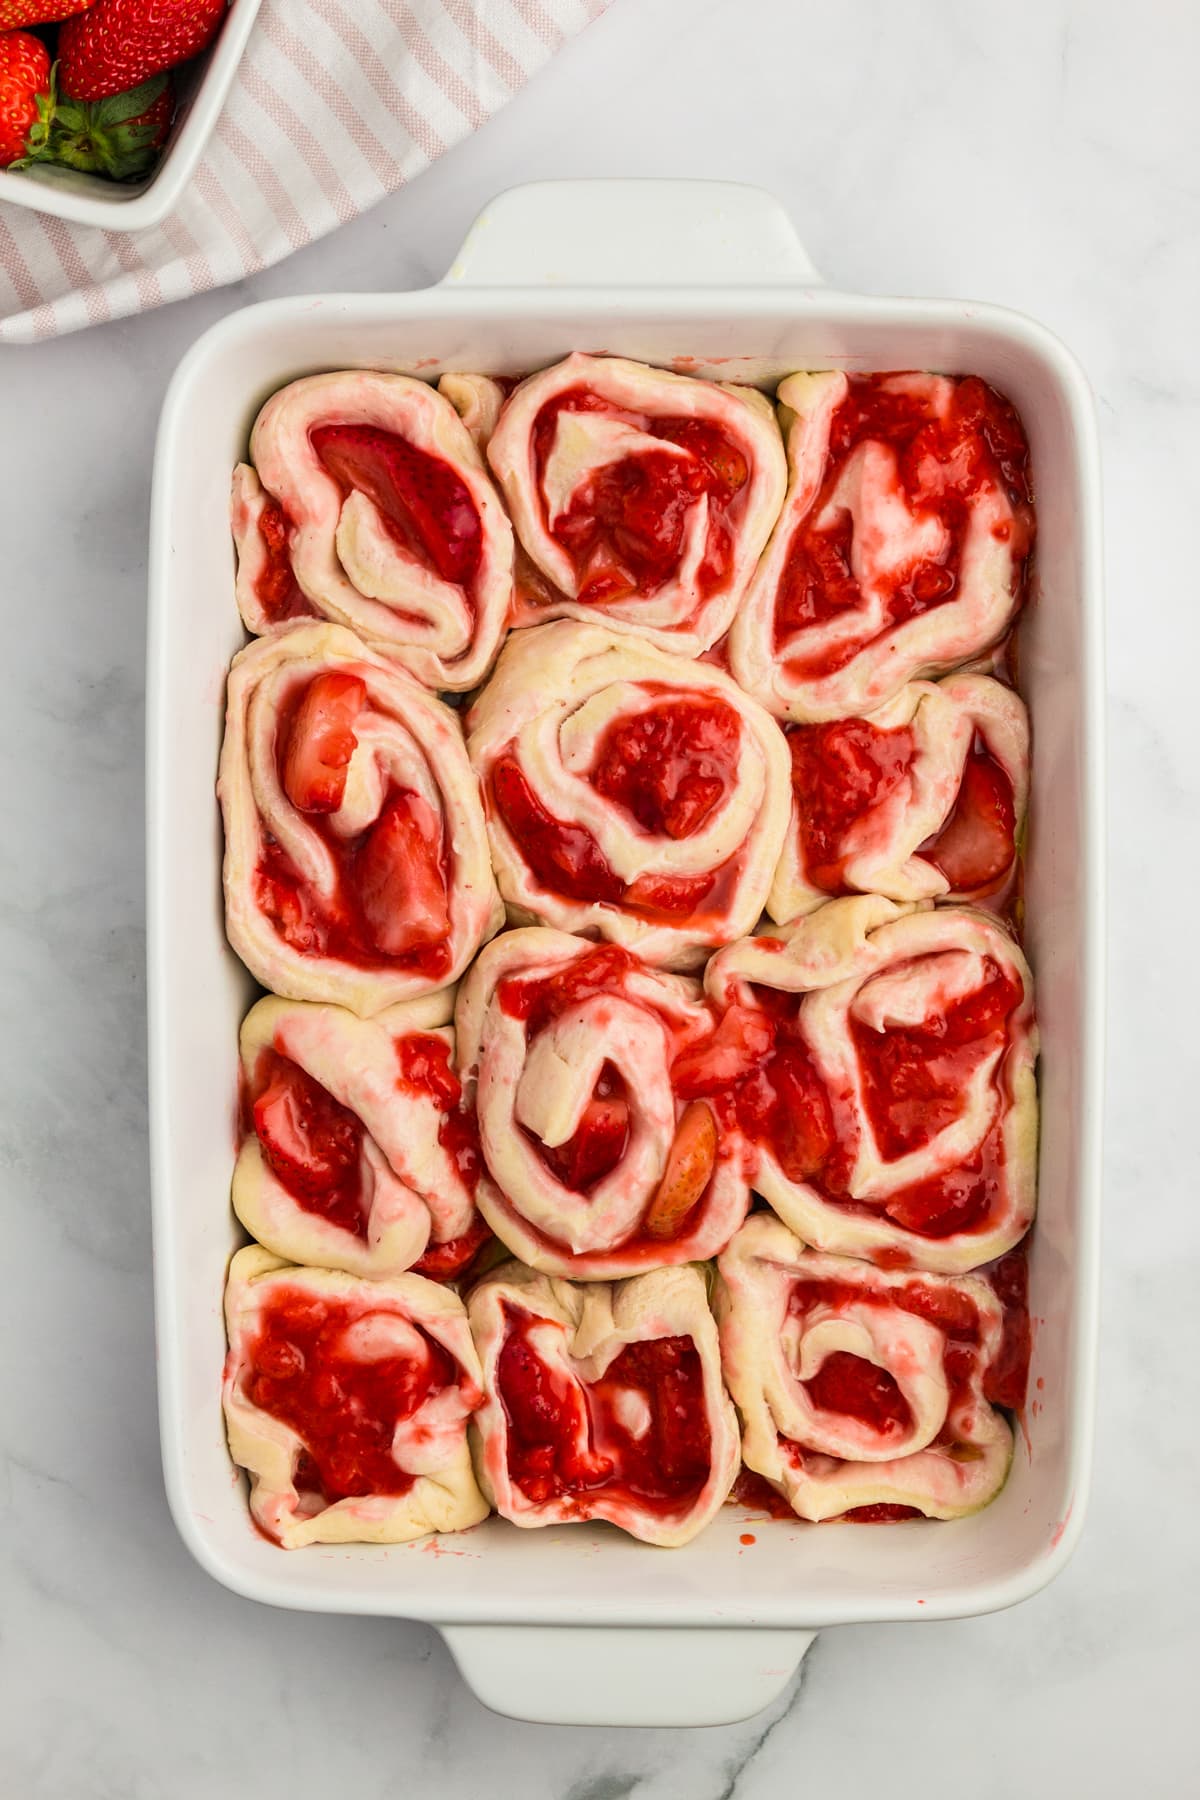 Strawberry Cinnamon Rolls in baking dish ready for oven